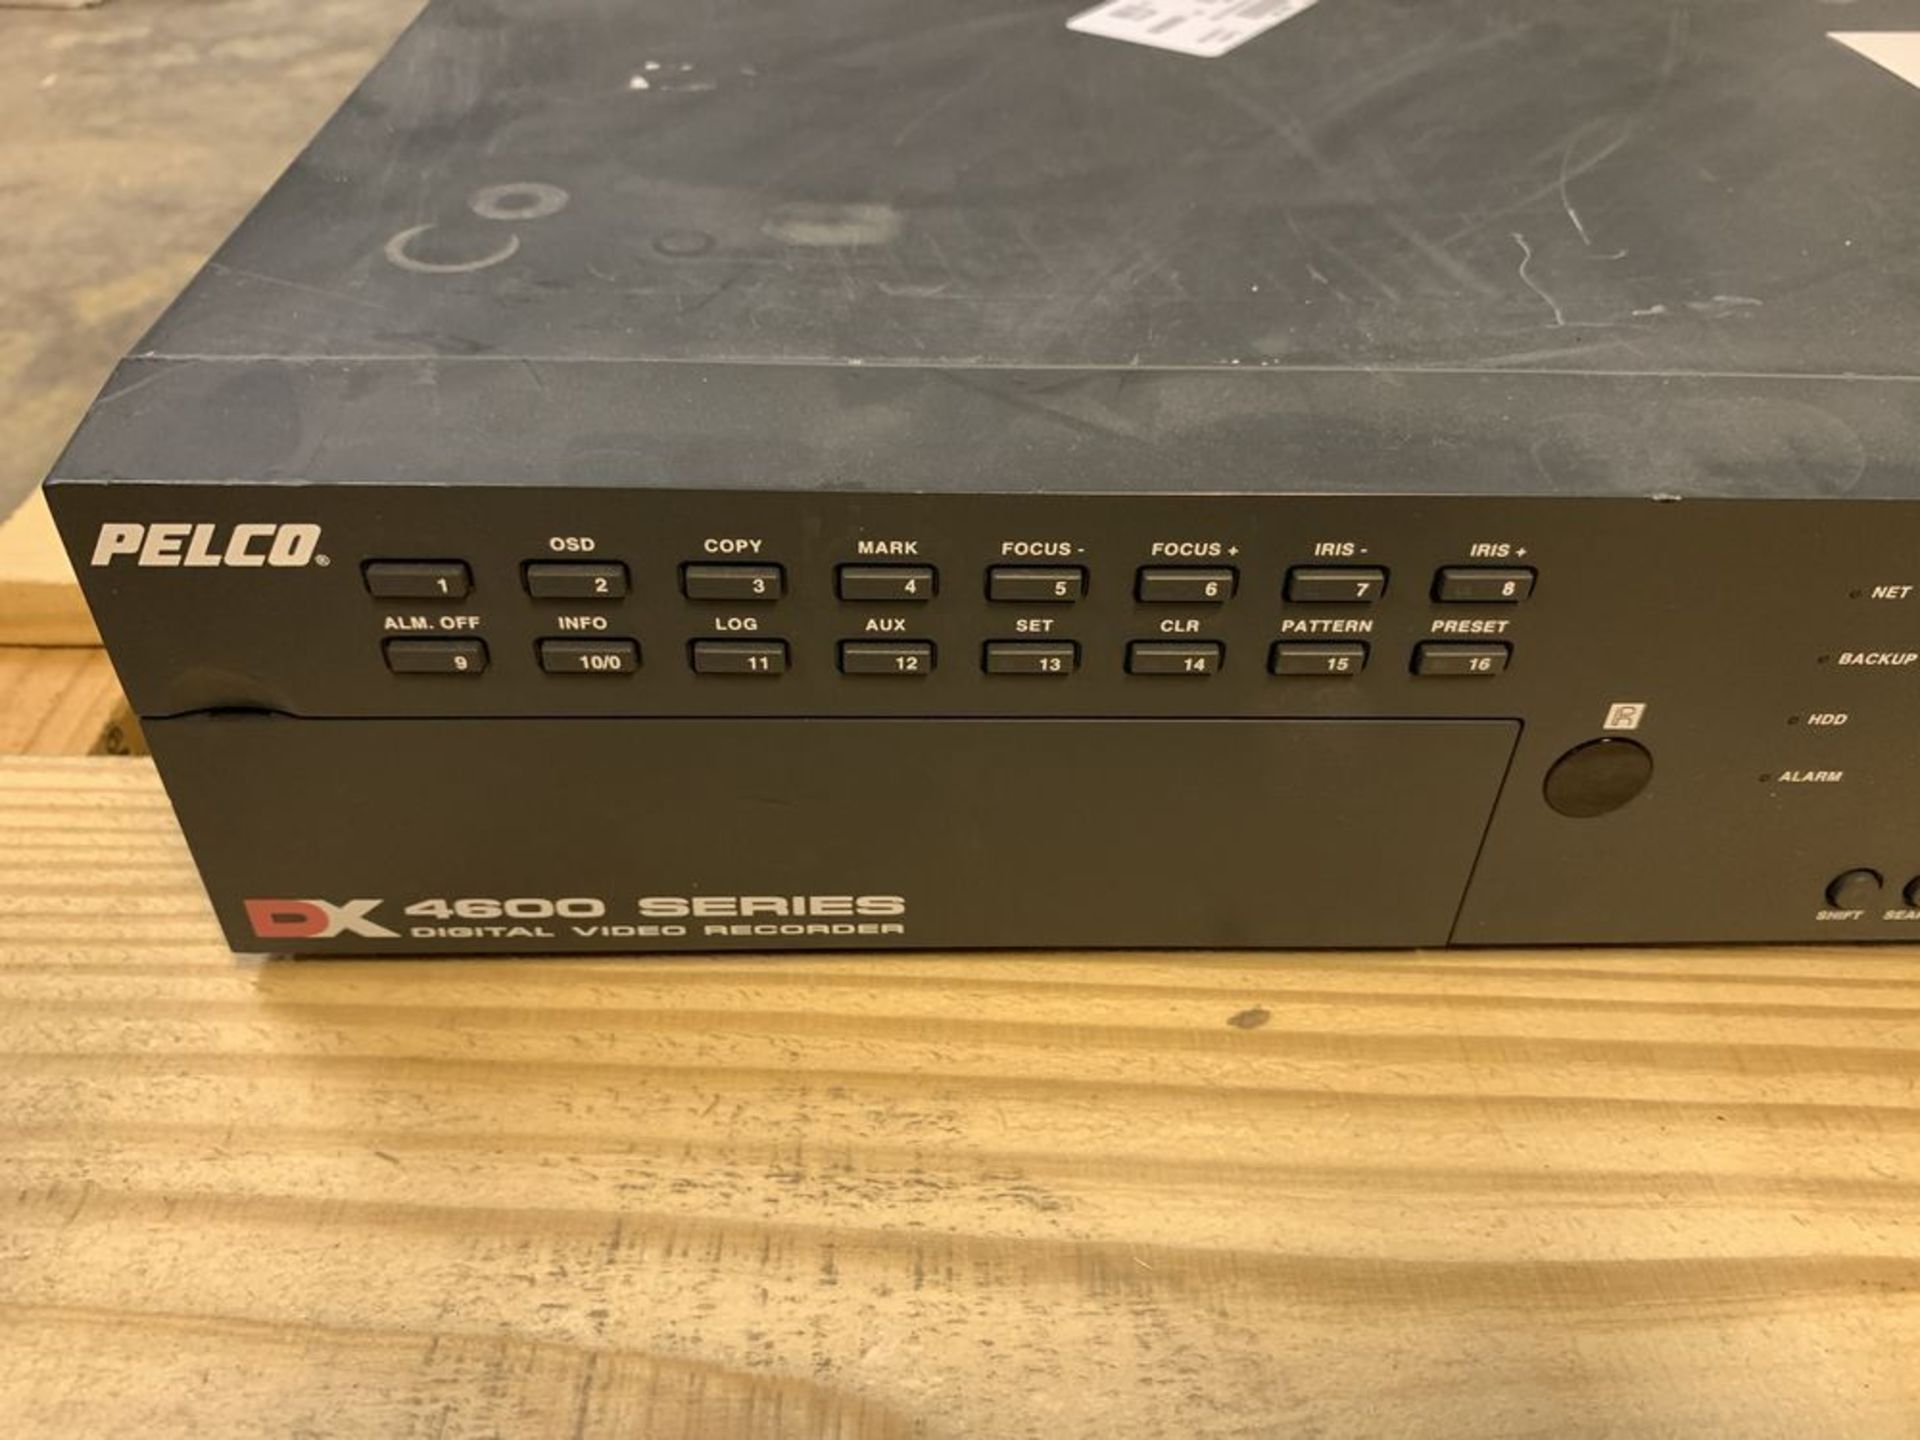 PELCO DX 4600 SERIES DIGITAL VIDEO RECORDER. ALL ITEMS ARE SOLD AS IS UNTESTED BUT CAME FROM A - Image 2 of 5